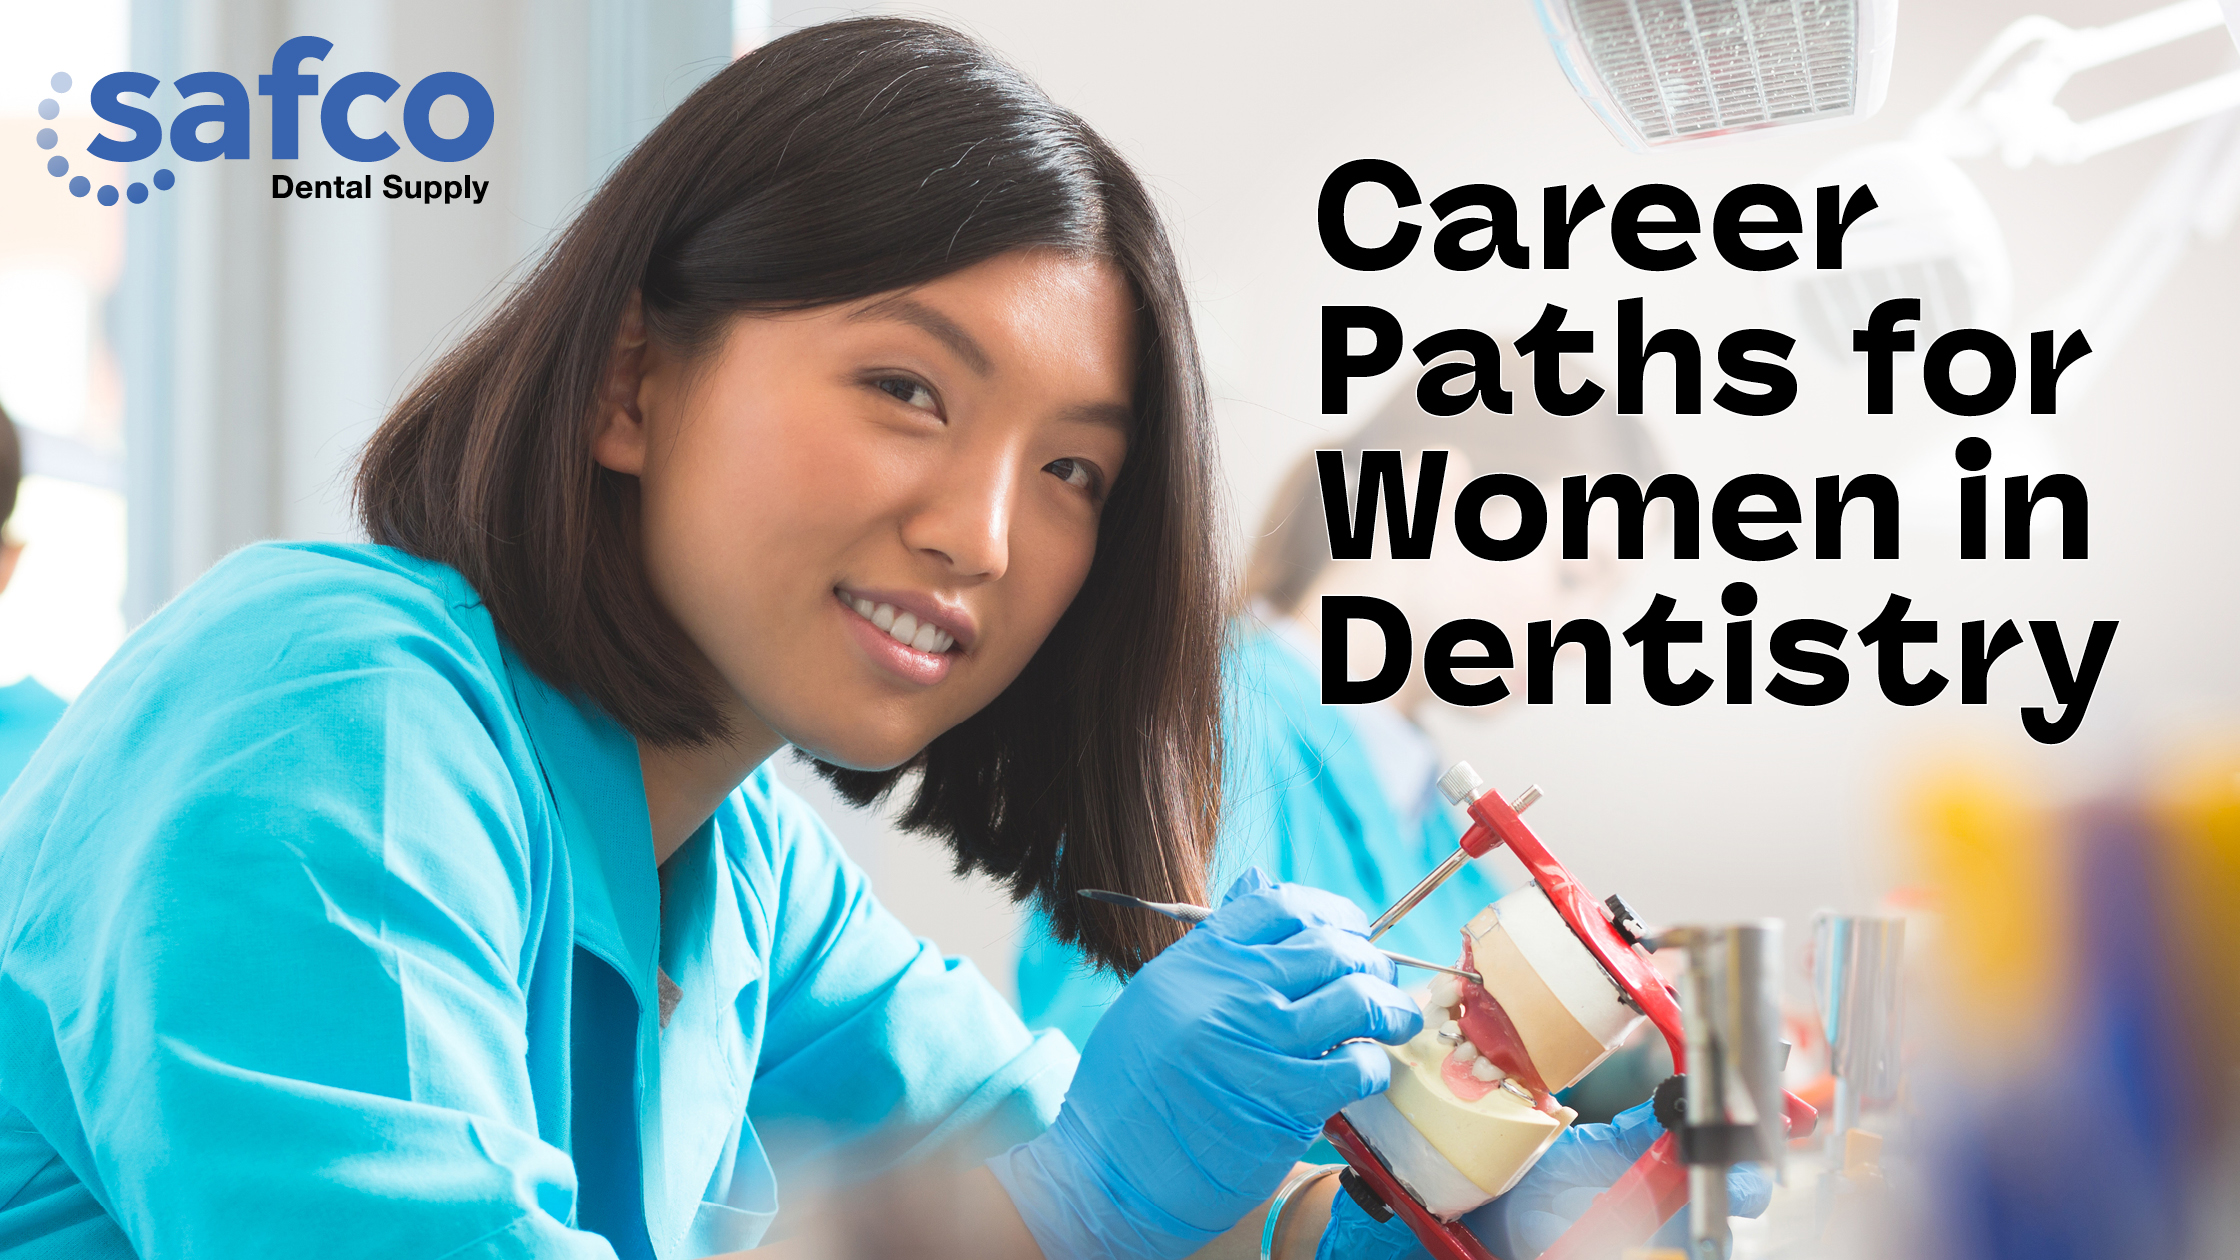 Career Paths for Women in Dentistry